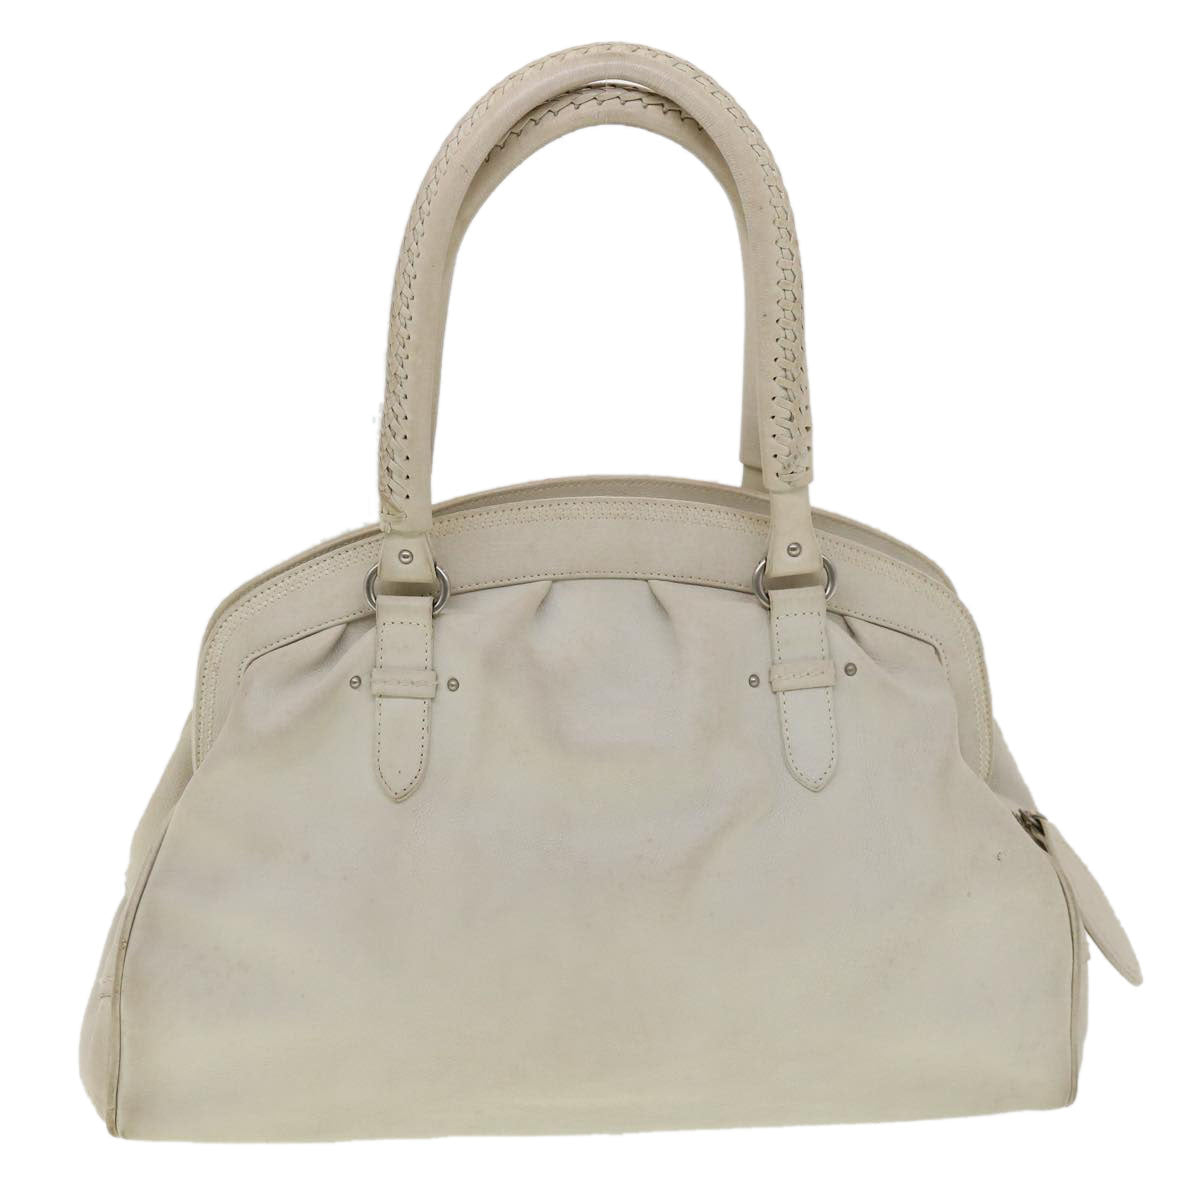 Christian Dior Shoulder Bag Leather White Auth am2766g - 0